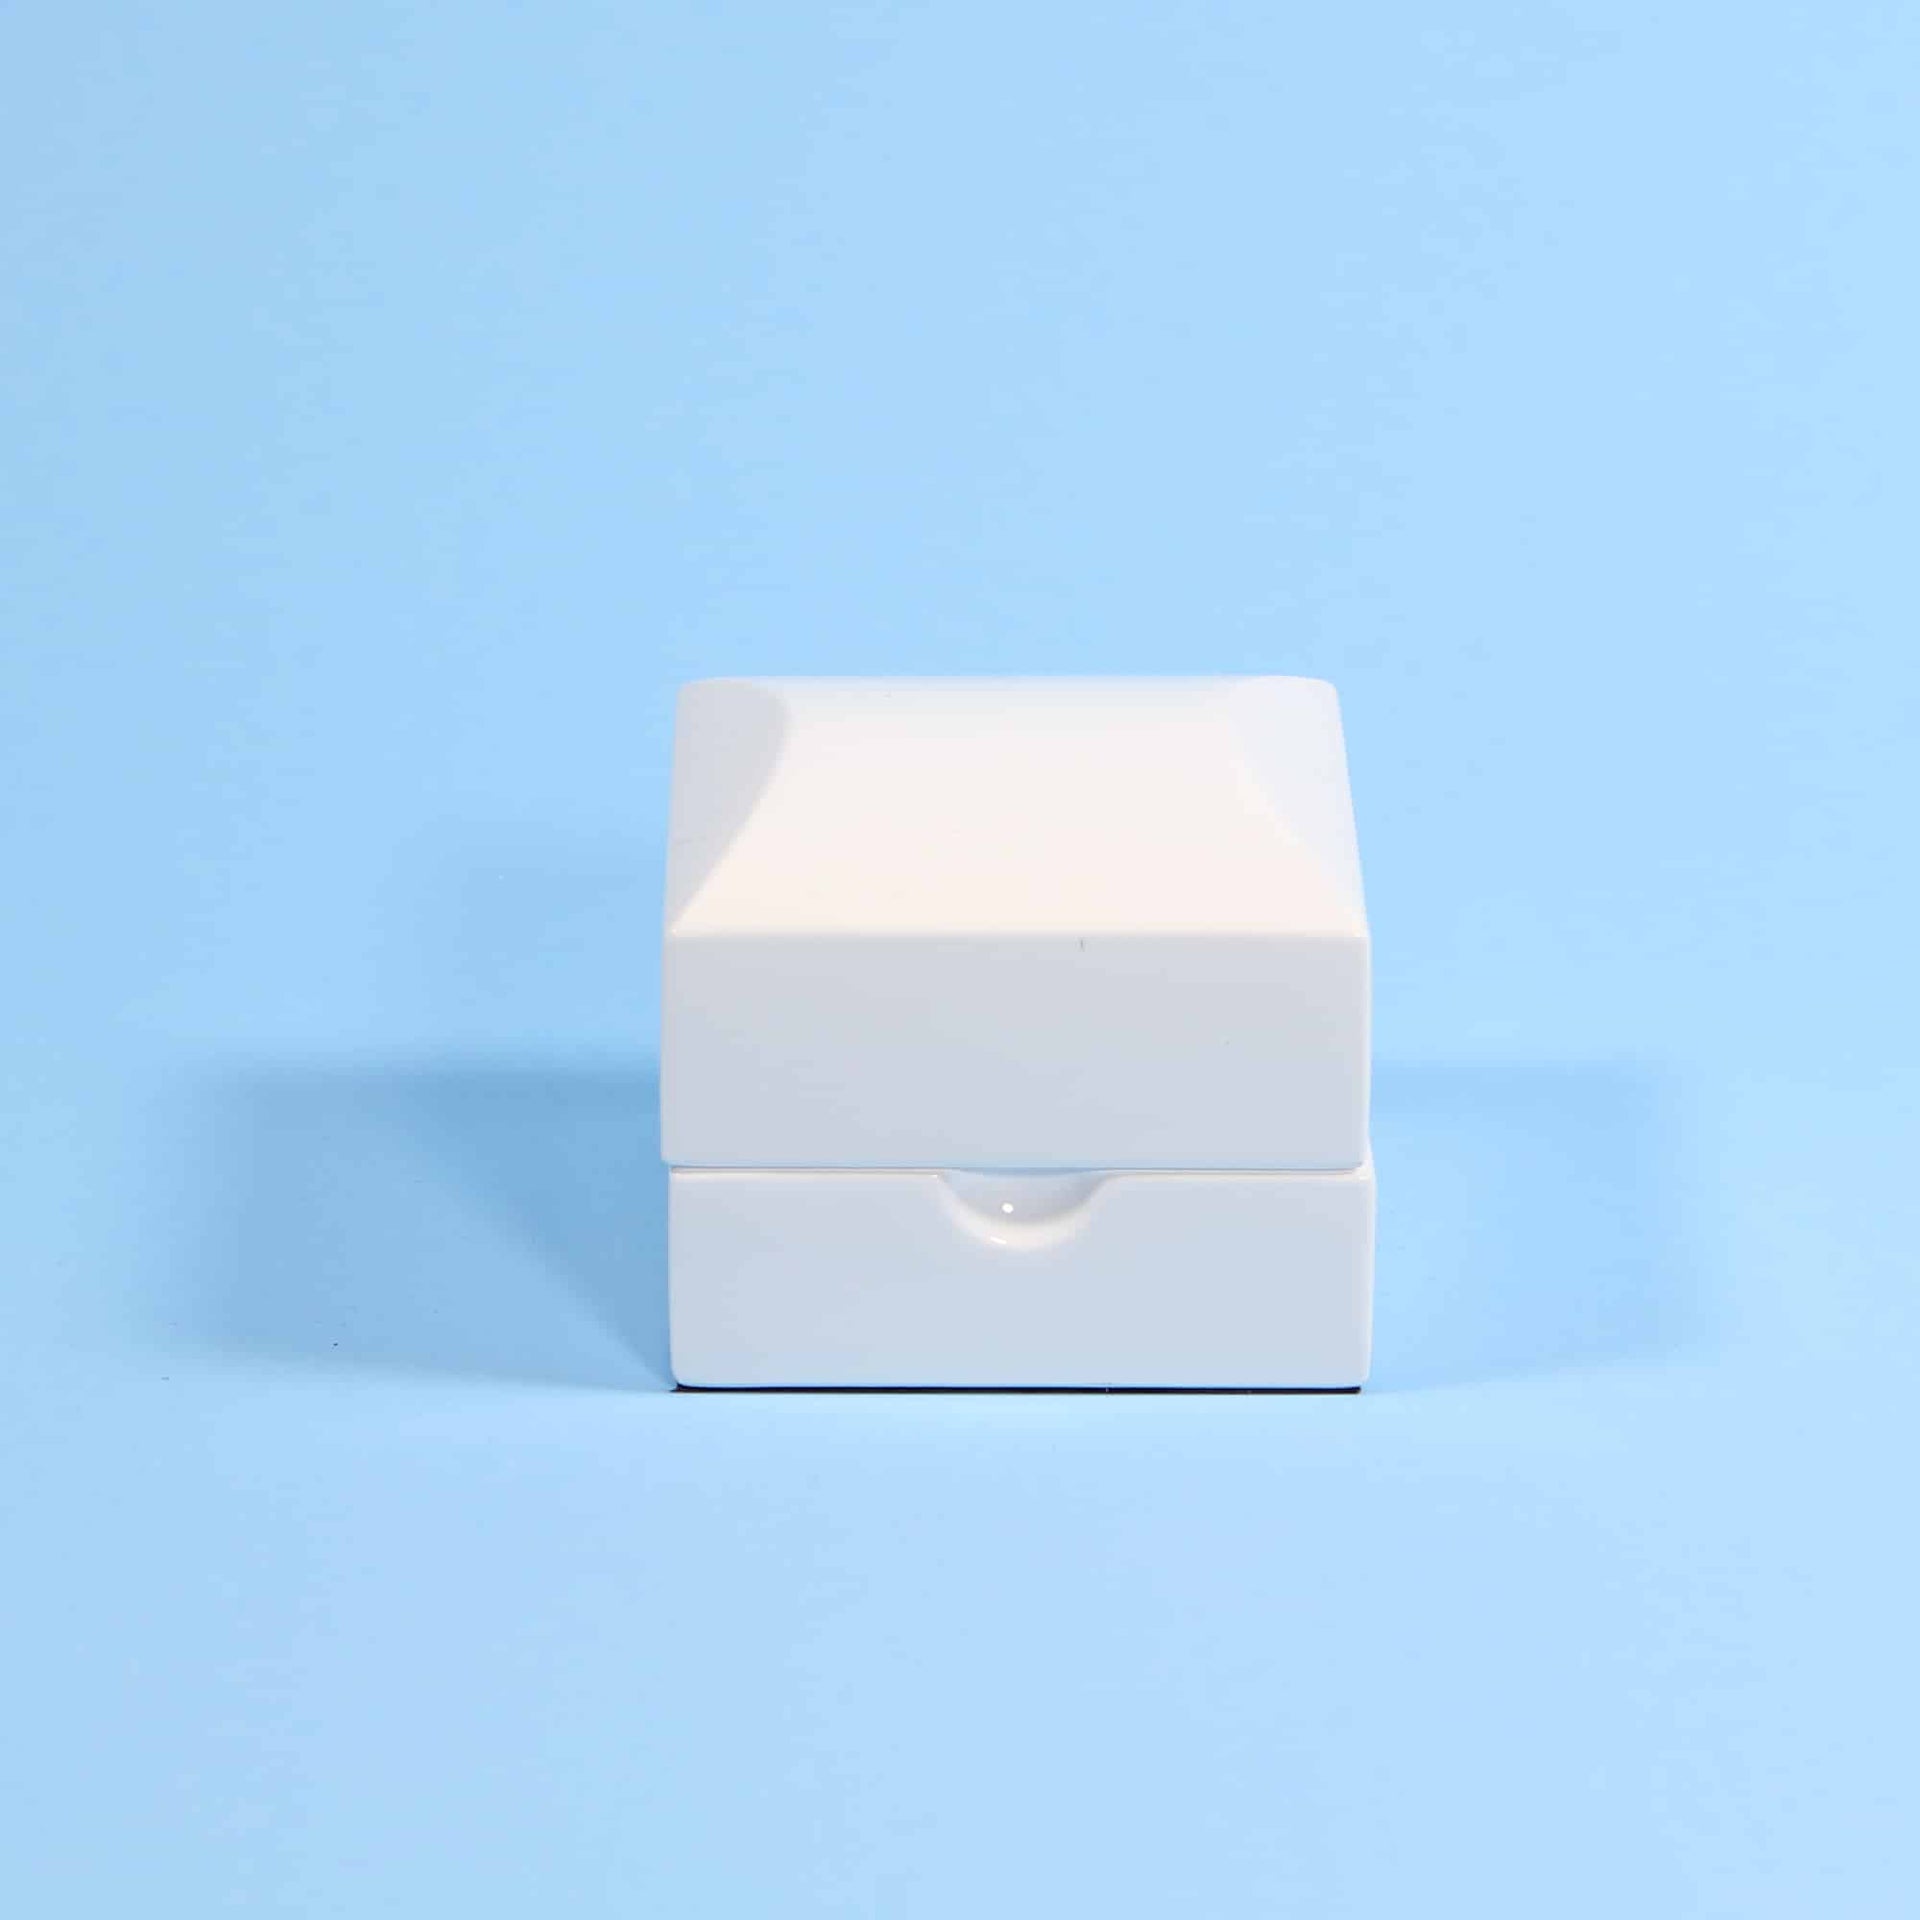 Luxury gloss white ring box for engagements, ,proposals, weddings and more. Velvet interior ensures the protection of your gems! The perfect modern ring box for your special day